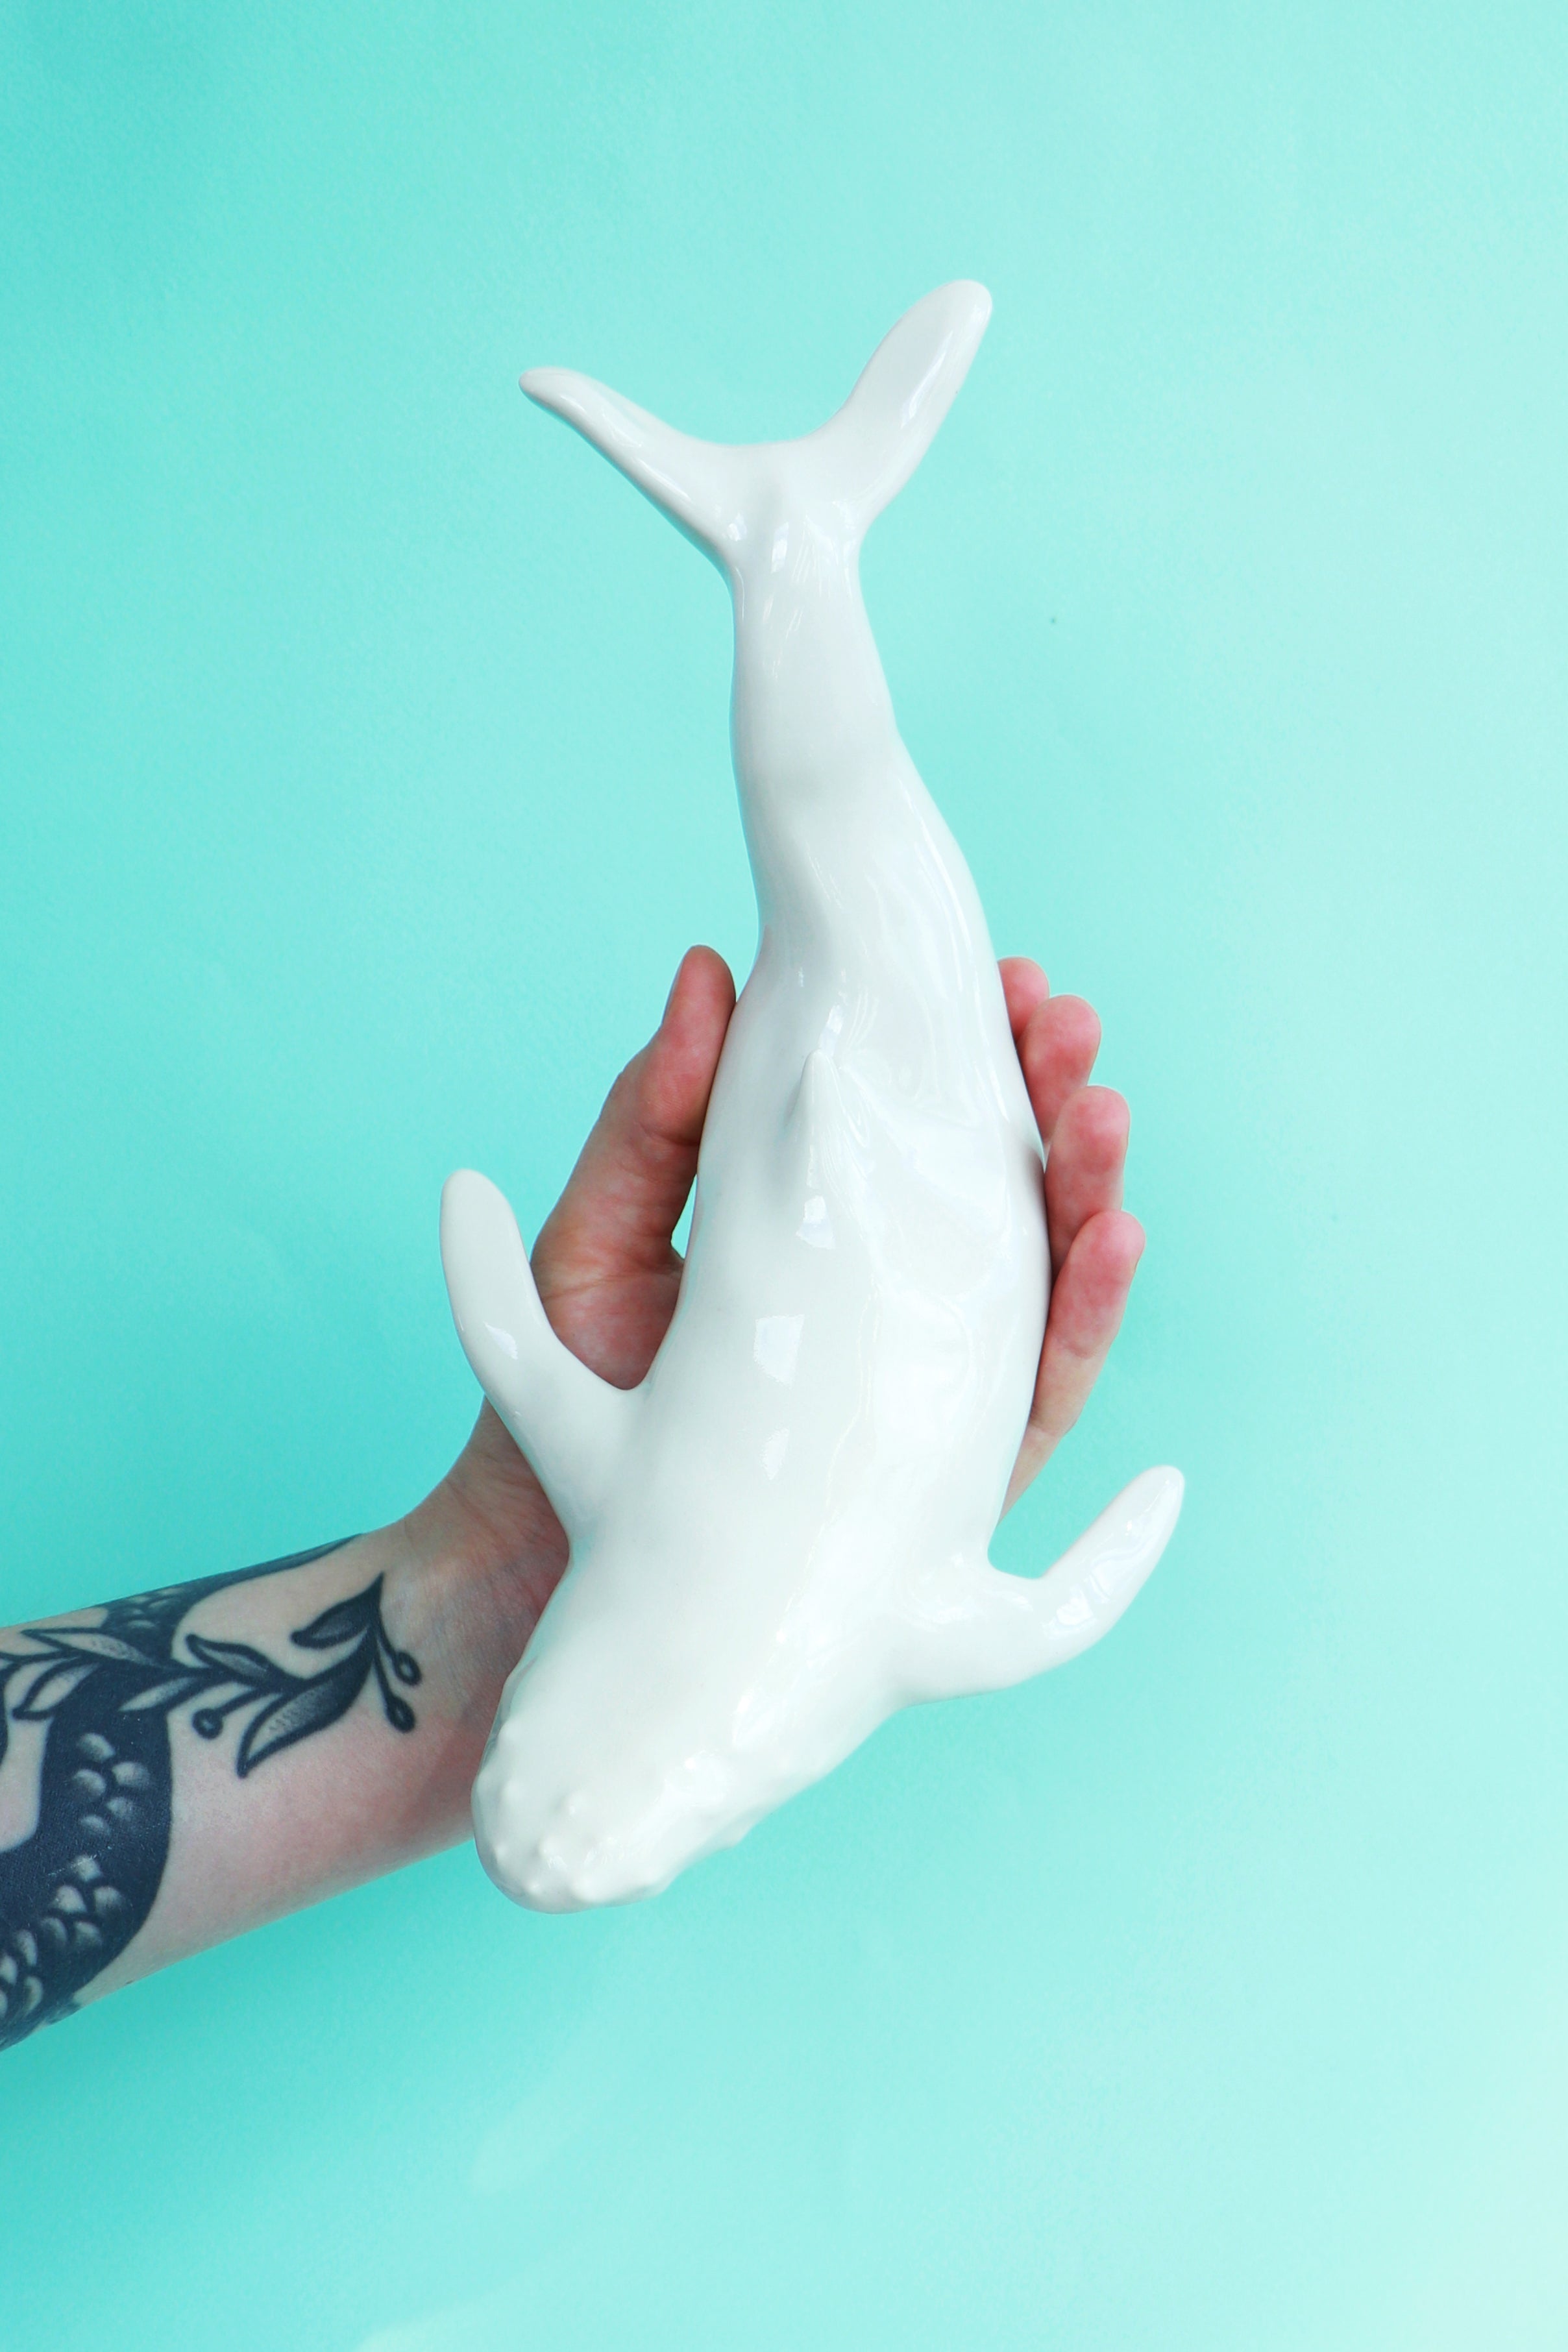 Ceramic humpback whale against a turquoise background. A tattooed arm is holding the whale.